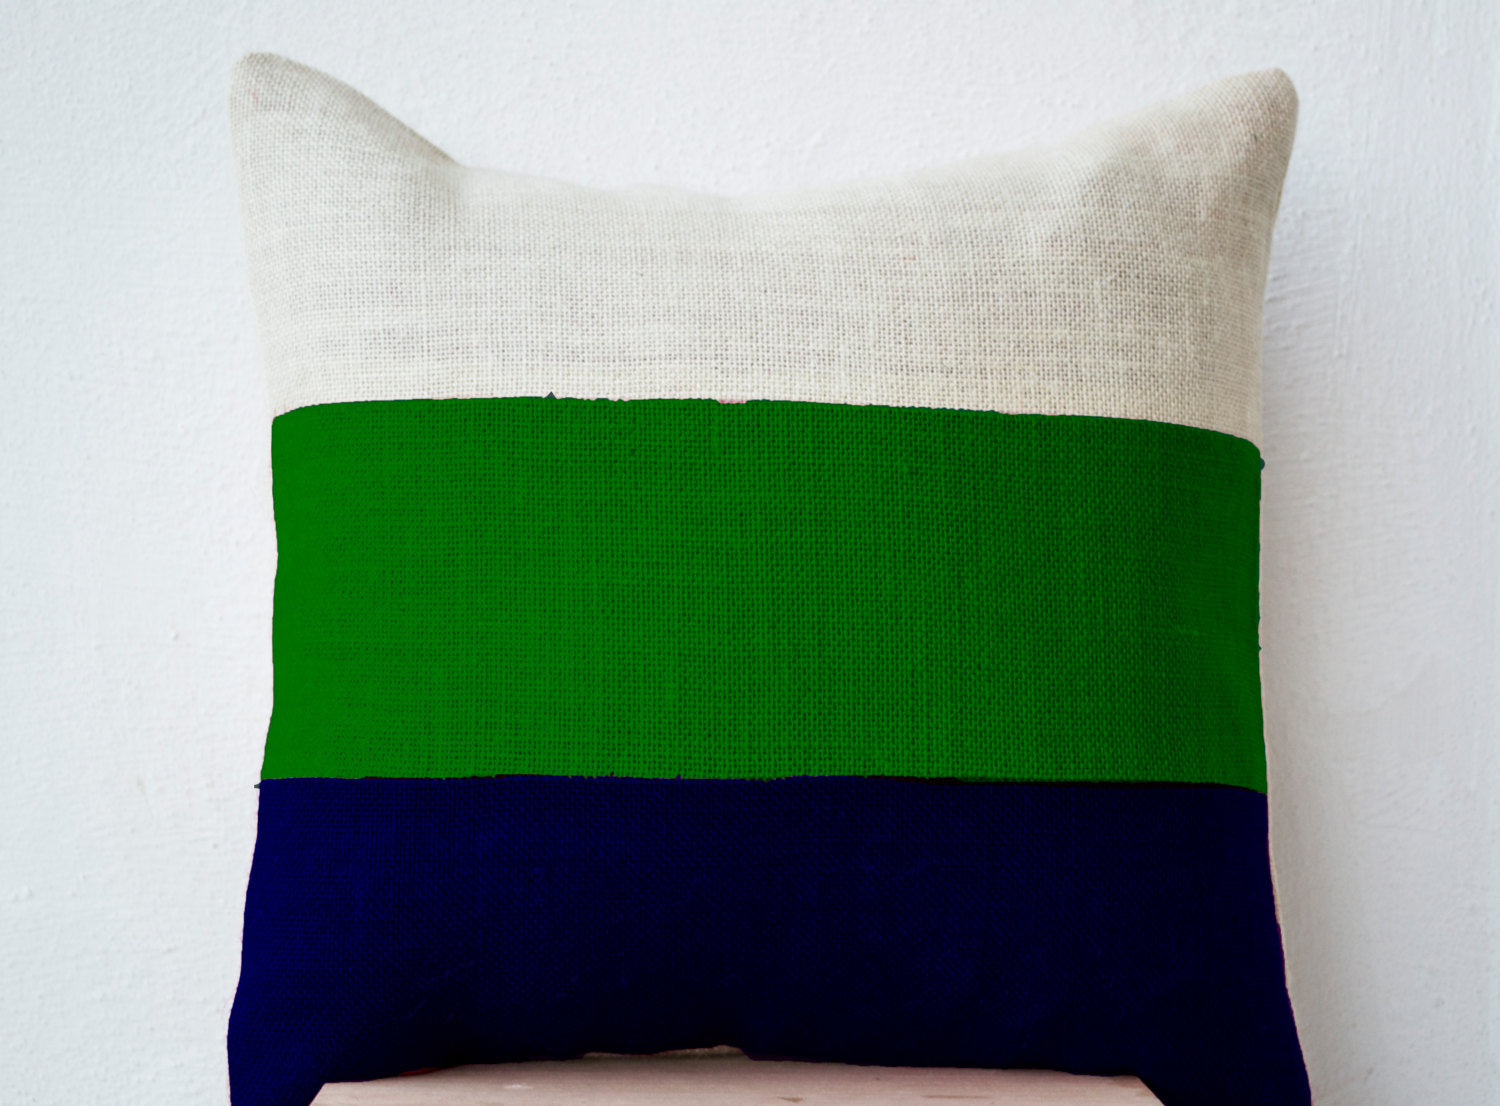 Amore Beaute Modern throw pillow cover in color block pattern.